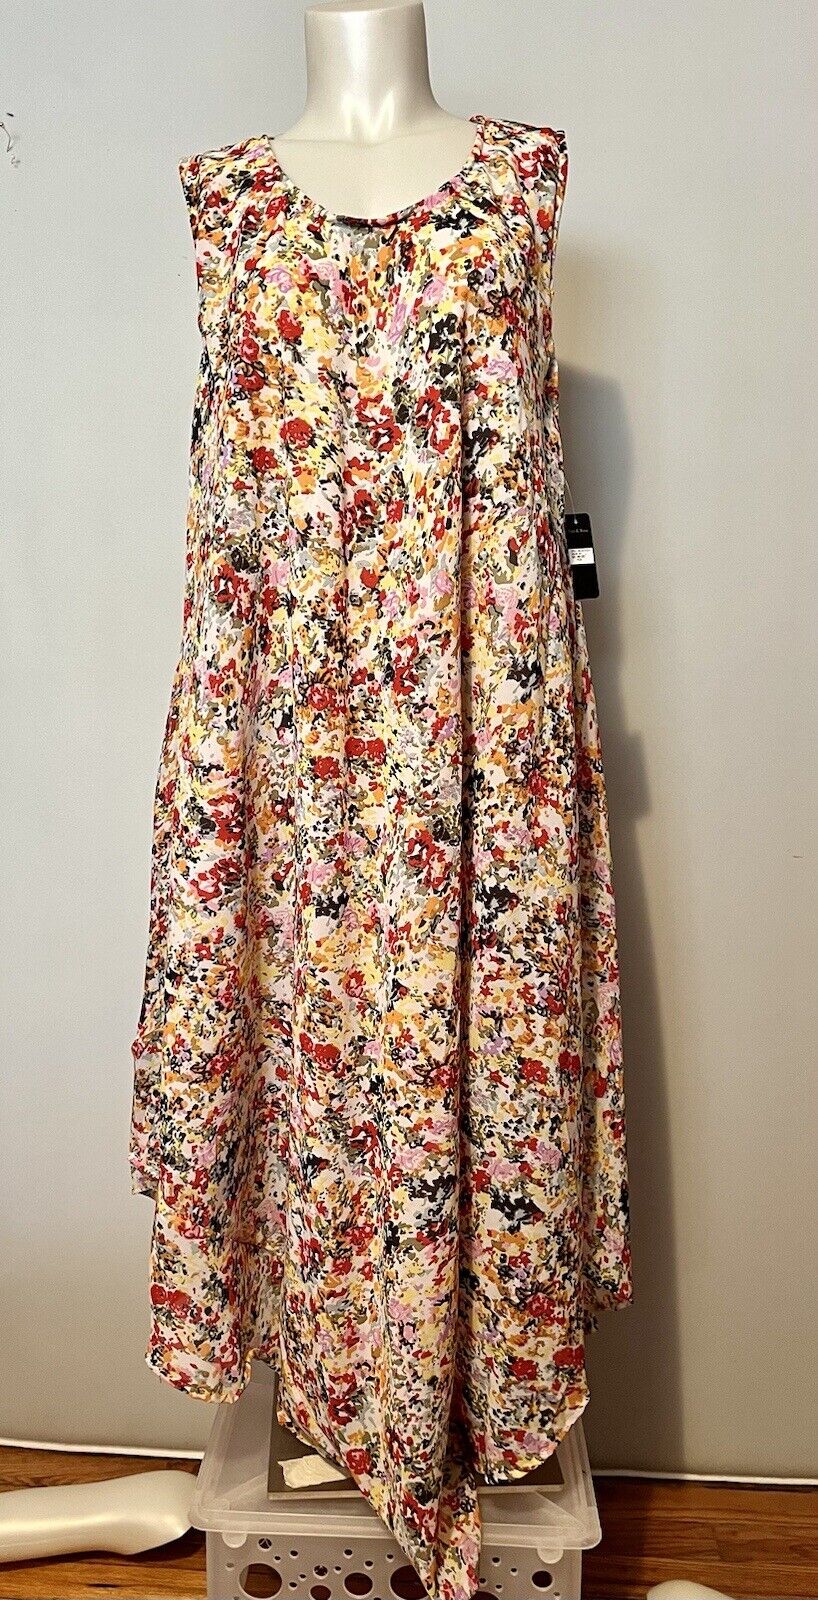 Ana&Rose Floral Dress NWT One Size Plus